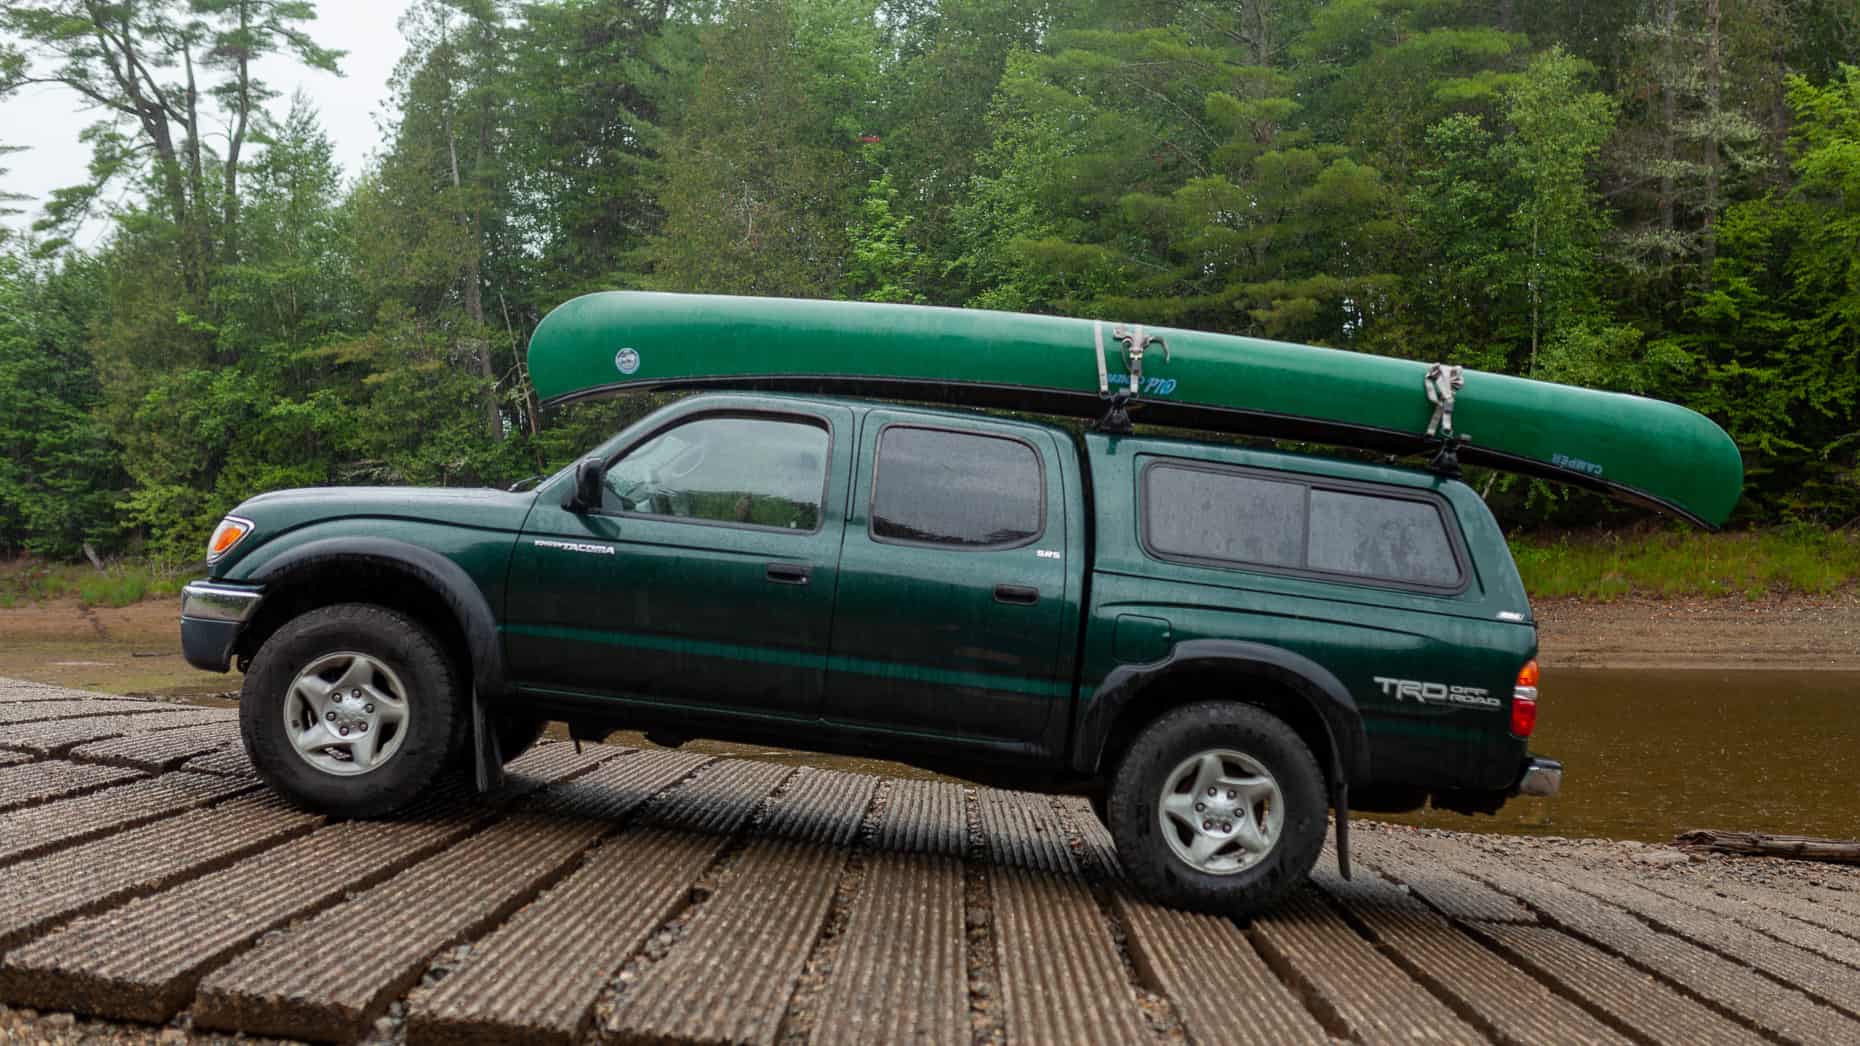 Green Toyota Tacoma on a boat launch with canoe on roof rack.